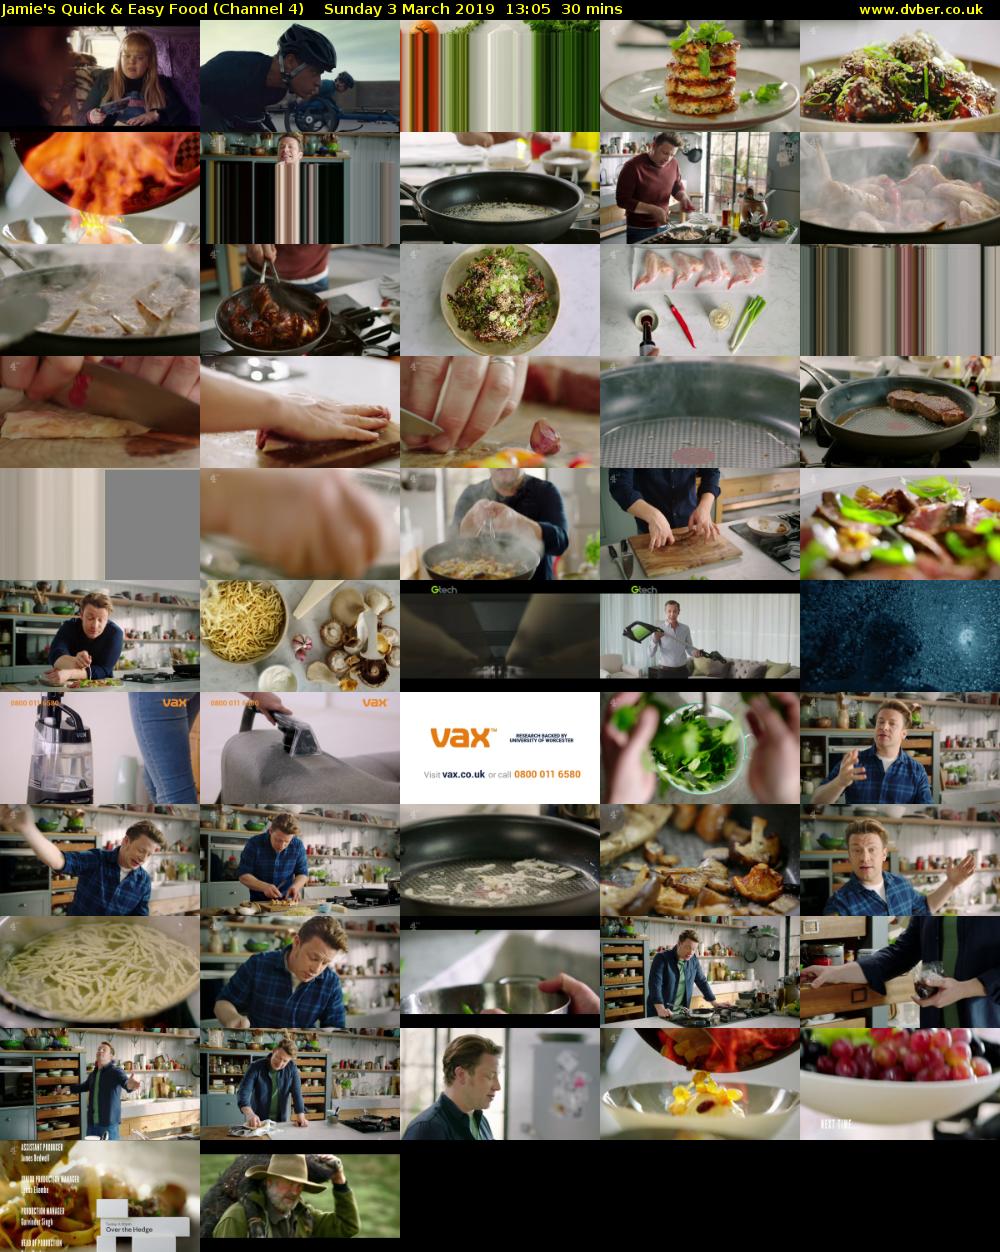 Jamie's Quick & Easy Food (Channel 4) Sunday 3 March 2019 13:05 - 13:35